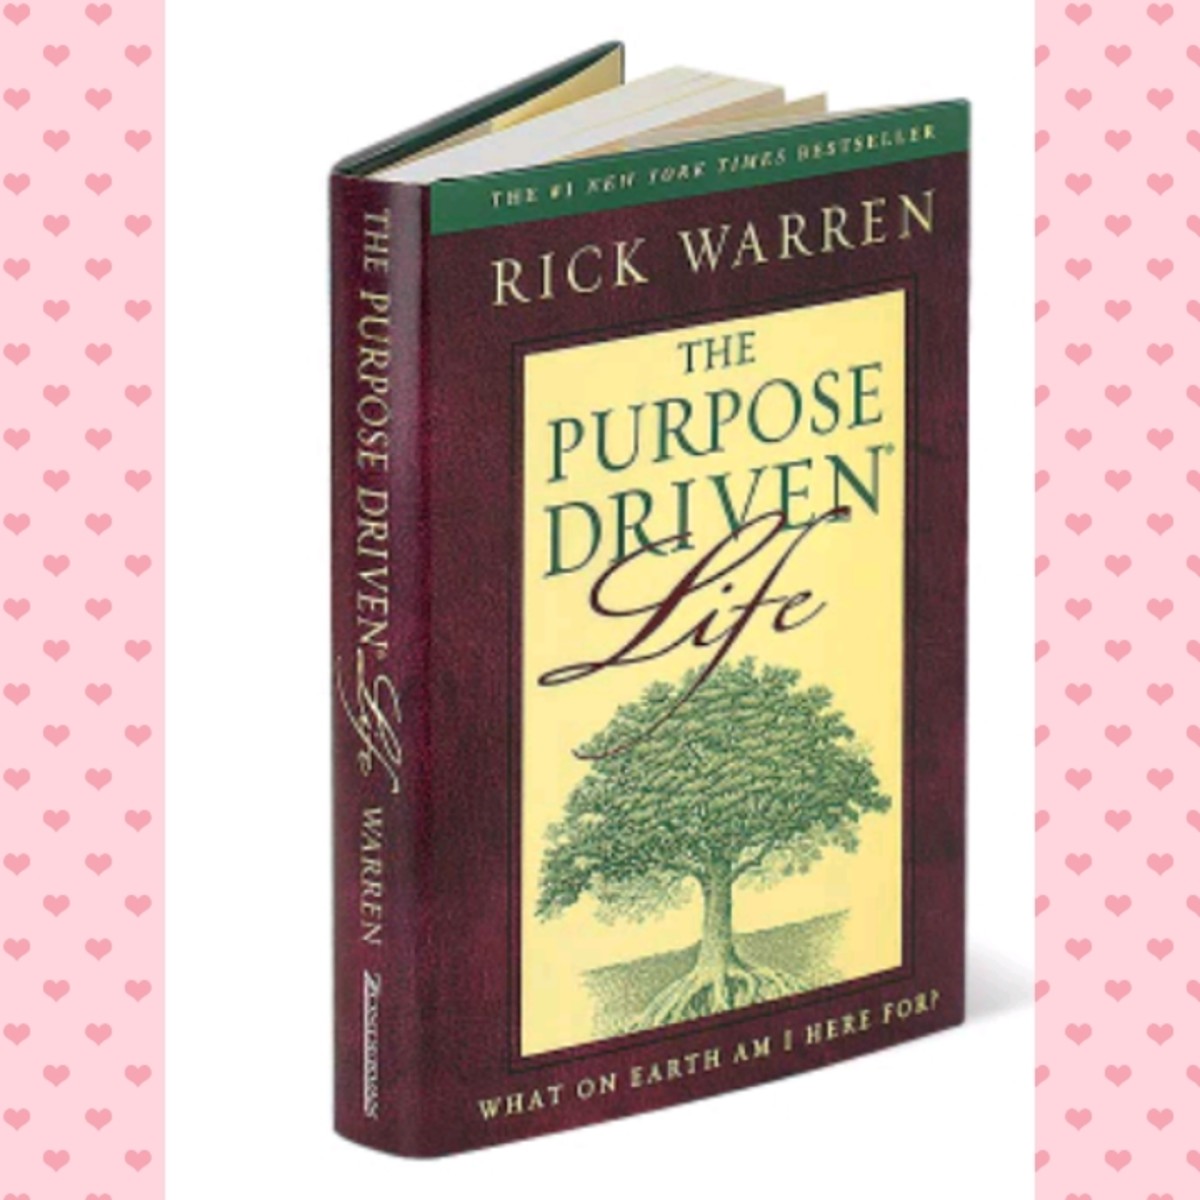 The purpose driven life by Rick Warren #1 Book Review